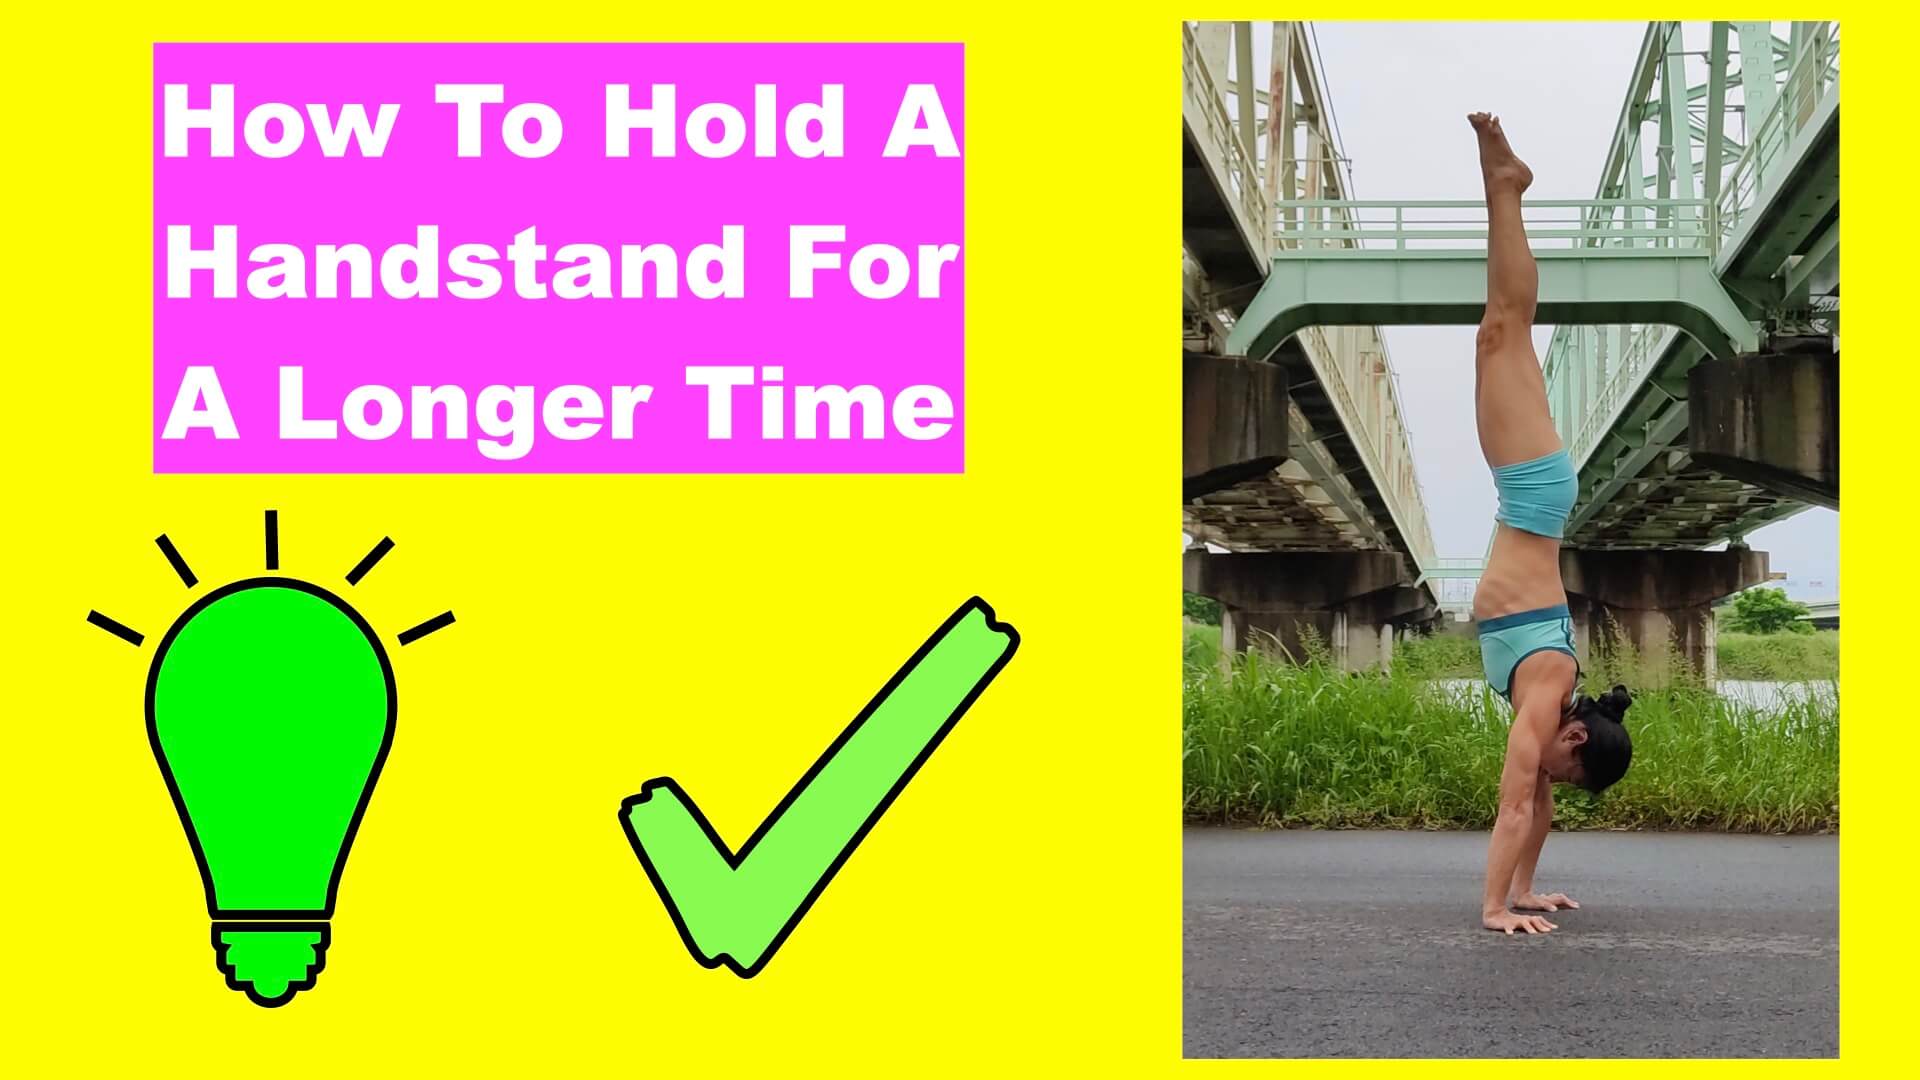 How to hold a handstand for a longer time turorial